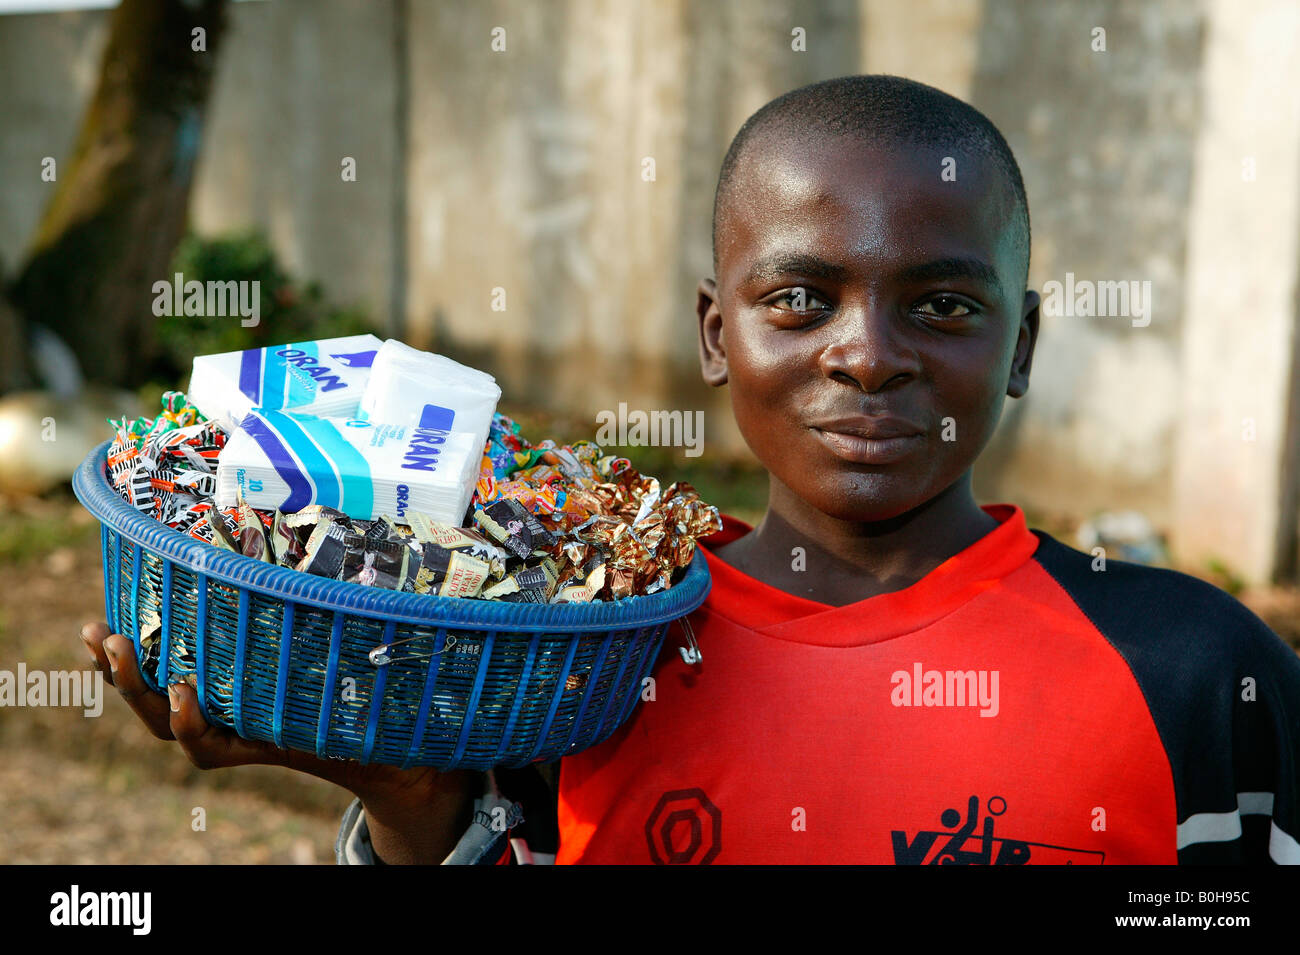 Teenage boy selling sweets and paper tissues in Douala, Cameroon, Africa Stock Photo